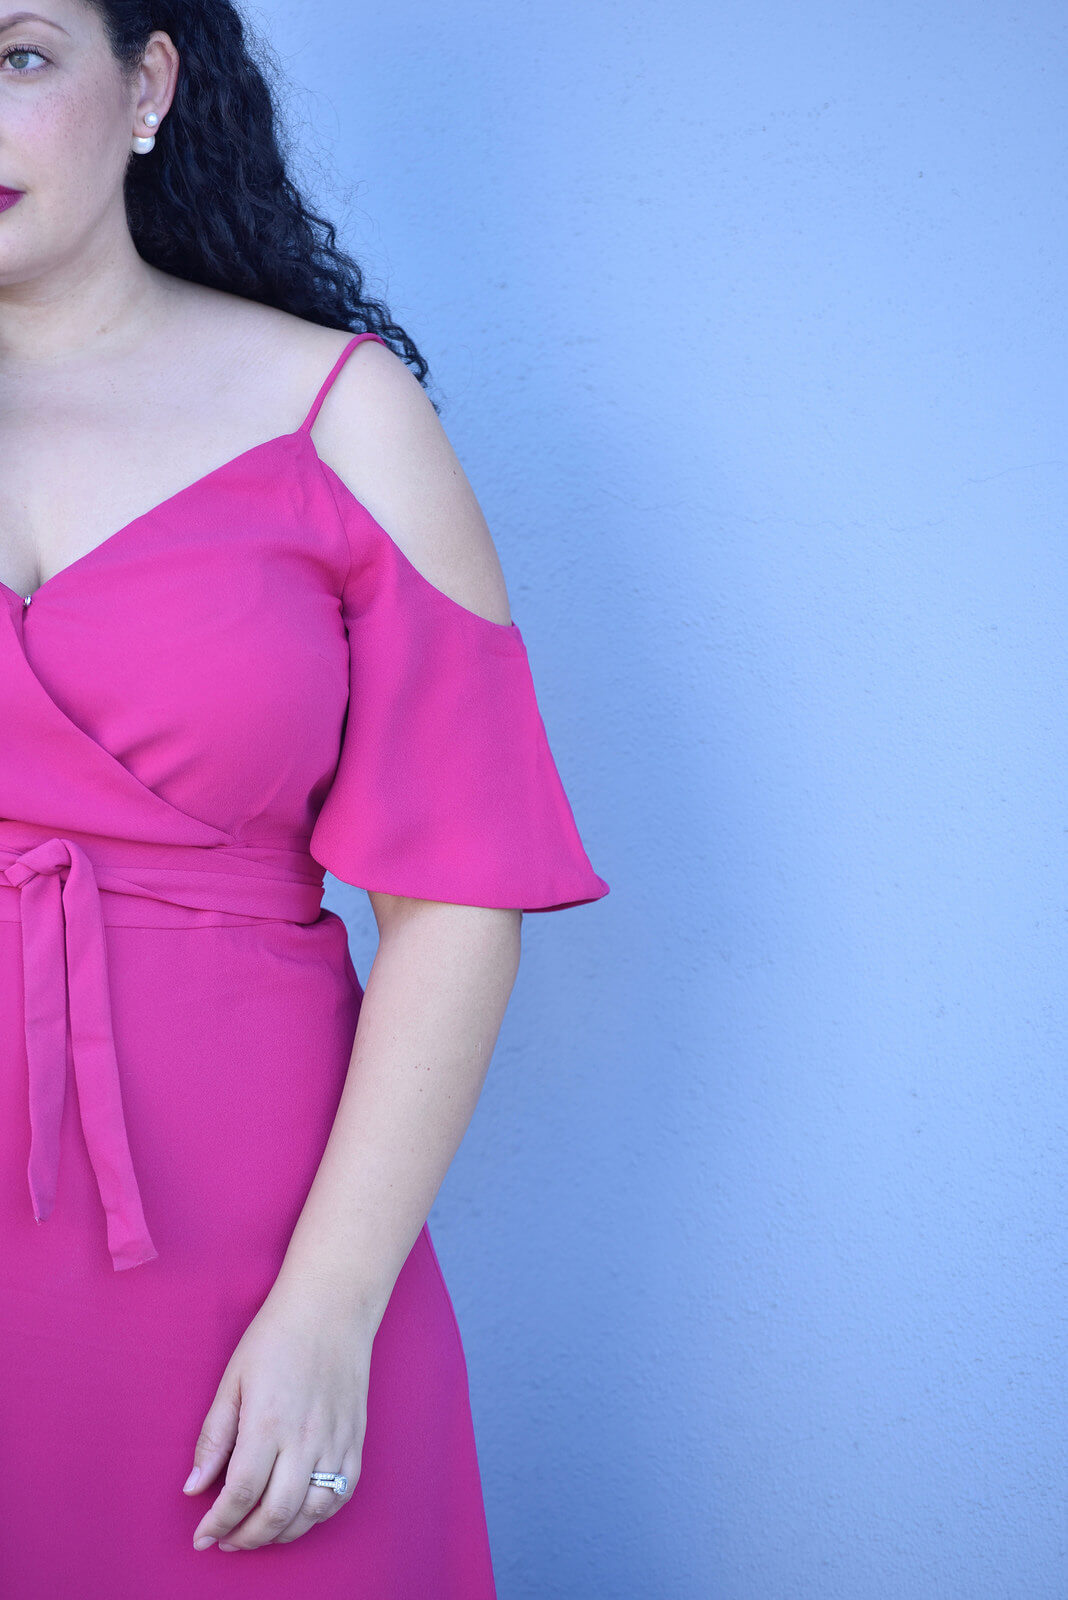 The Dress That's Flattering On Everyone via Girl With Curves